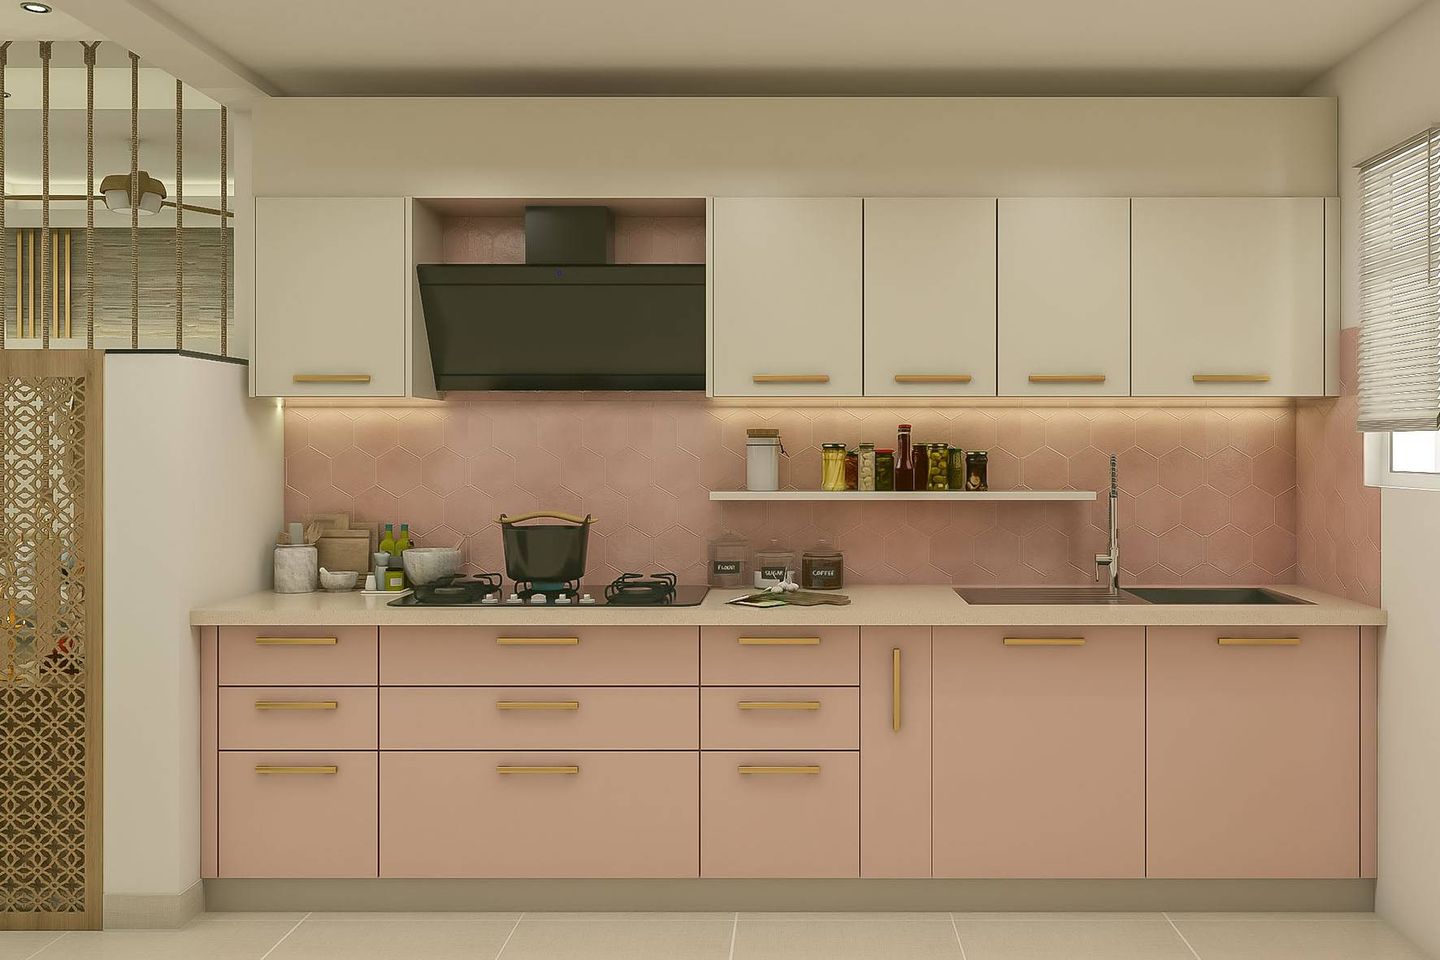 Modern Parallel Kitchen Design With Pink And Cream Cabinets - Livspace